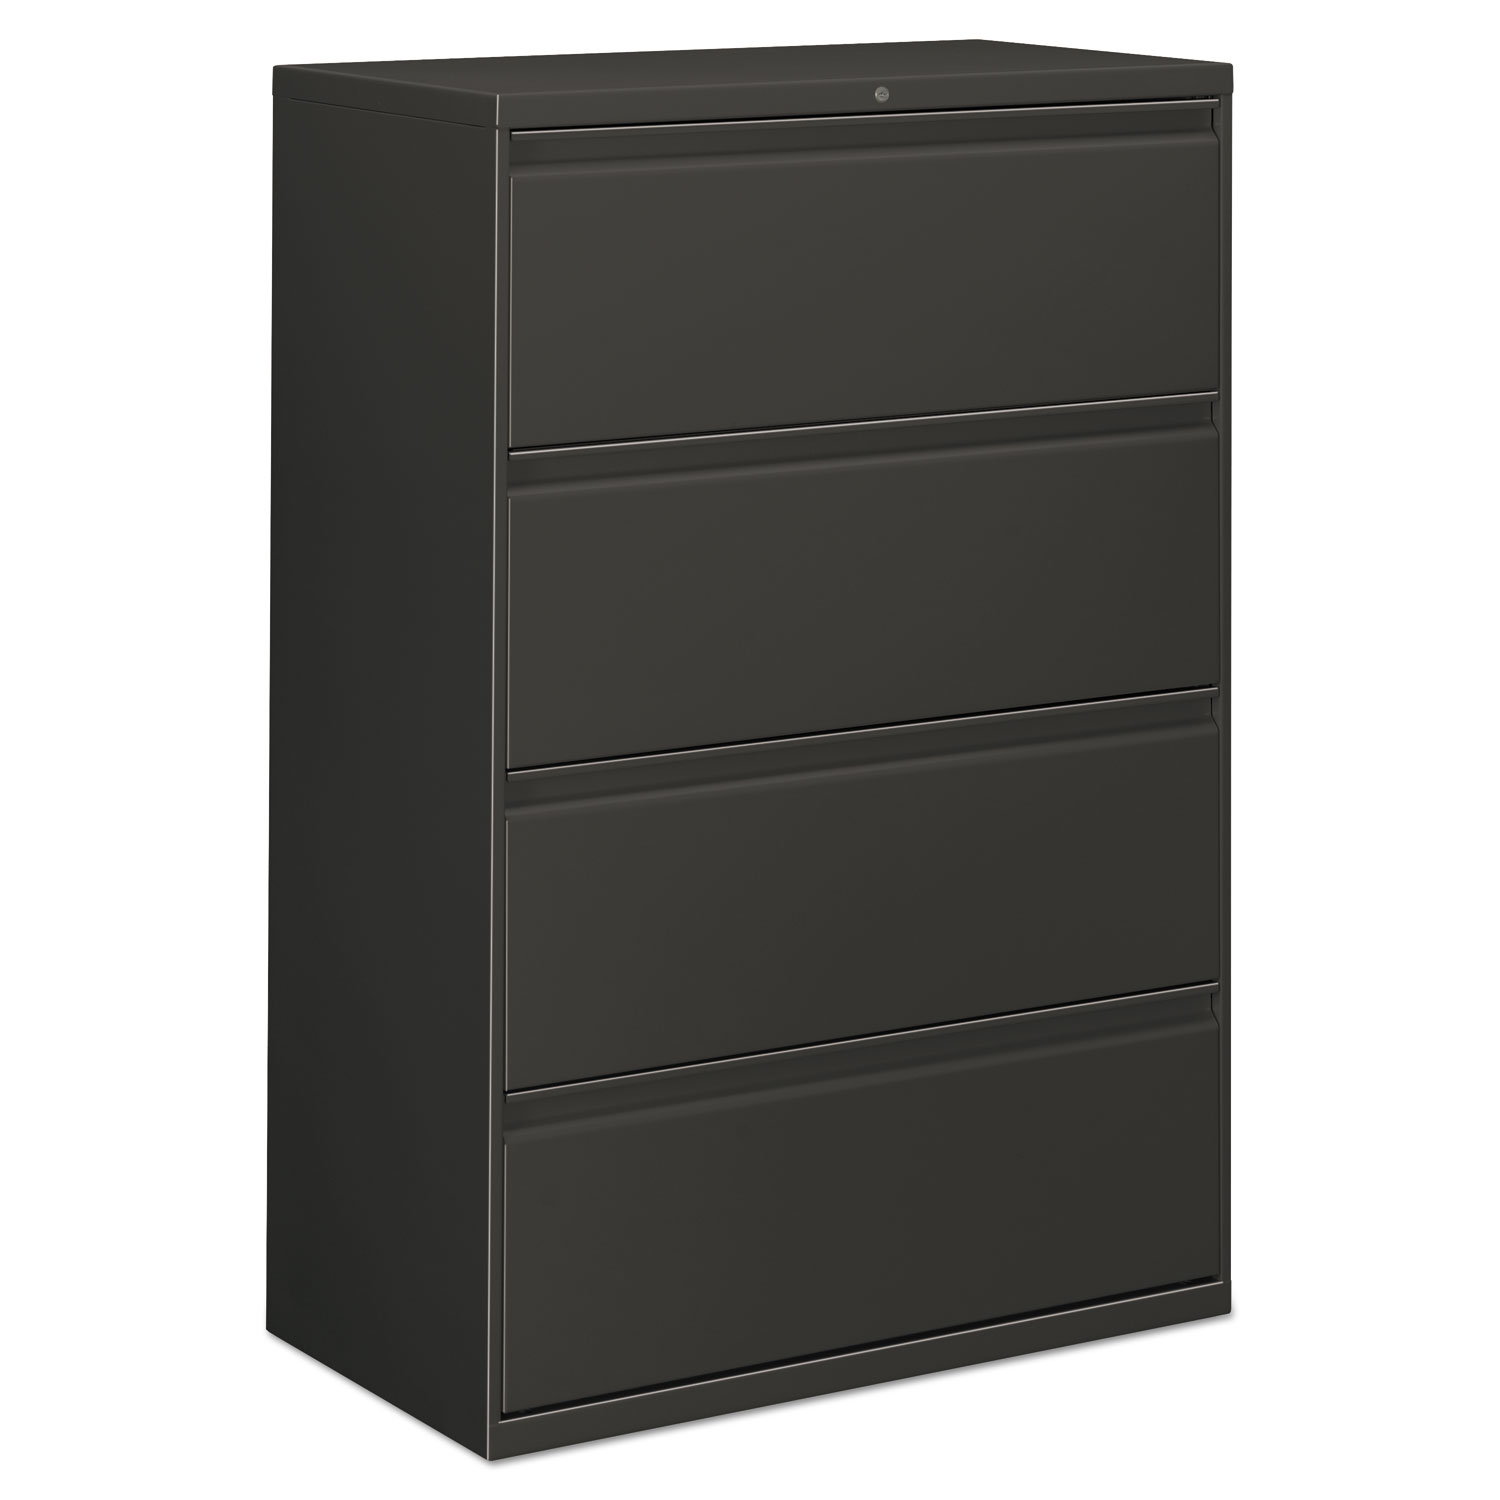 Lateral File, 4 Drawer, 30w x 19.25d x 53.25h, Charcoal